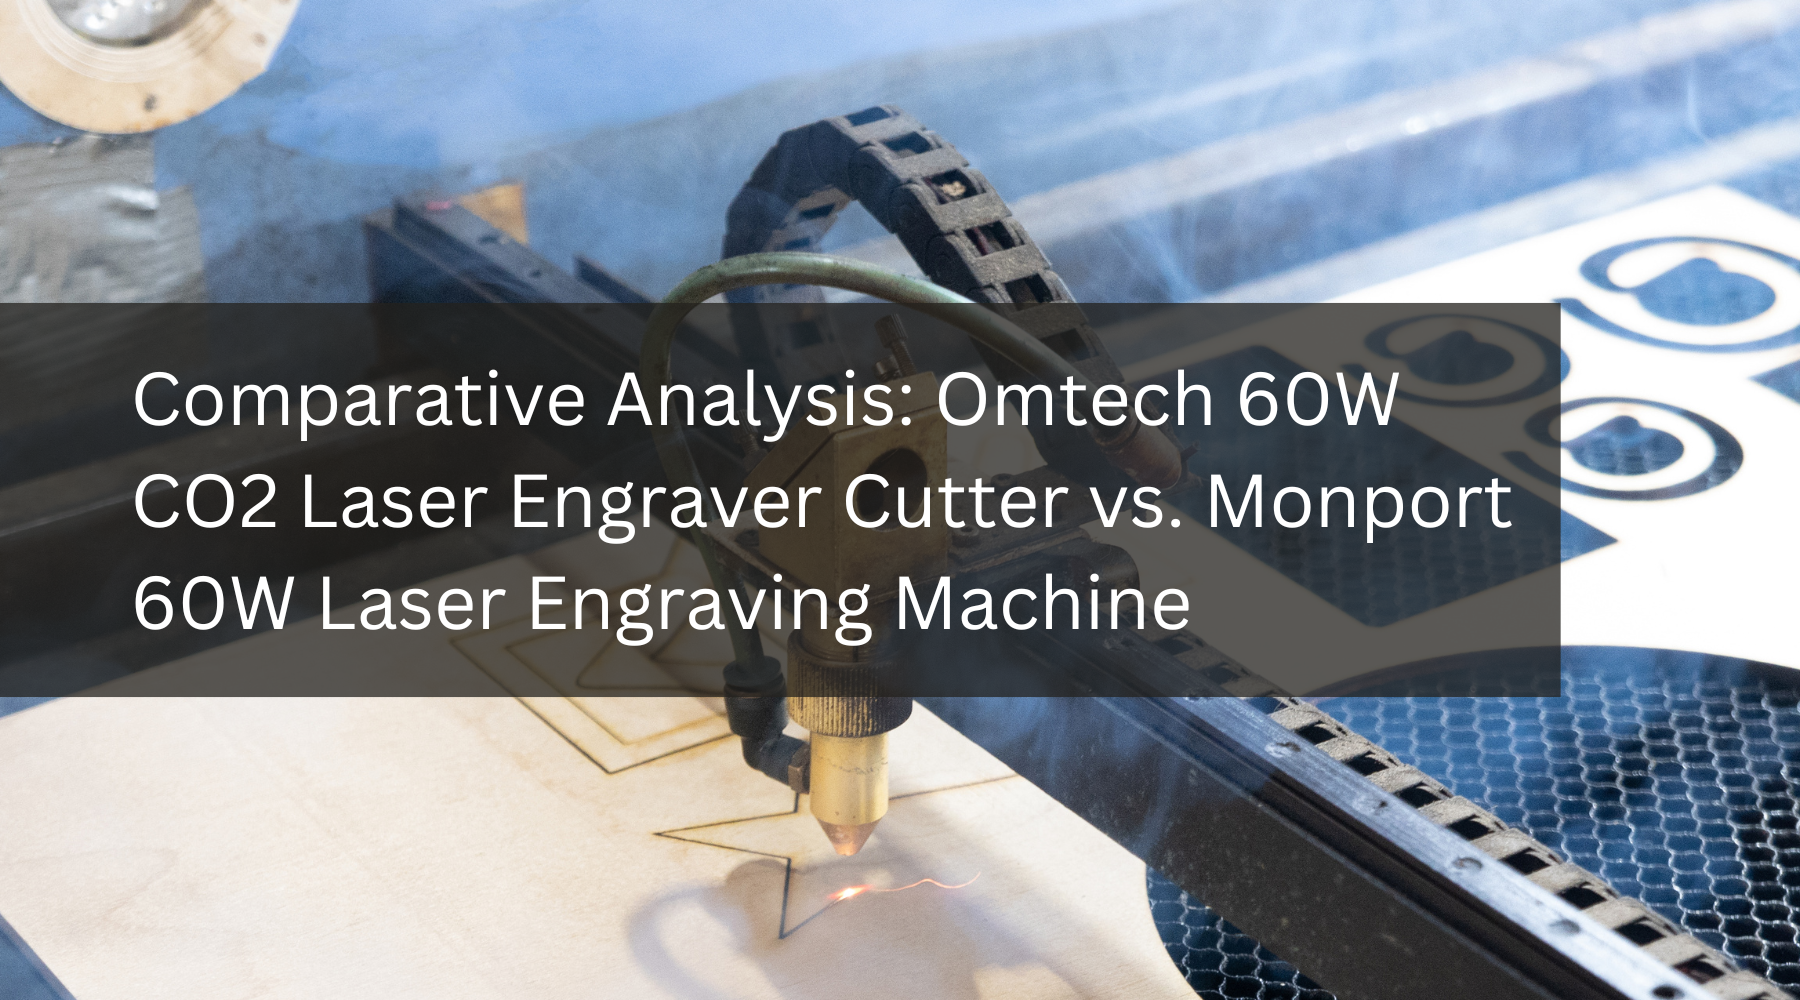 Comparative Analysis: Omtech 60W CO2 Laser Engraver Cutter vs. Monport 60W Laser Engraving Machine